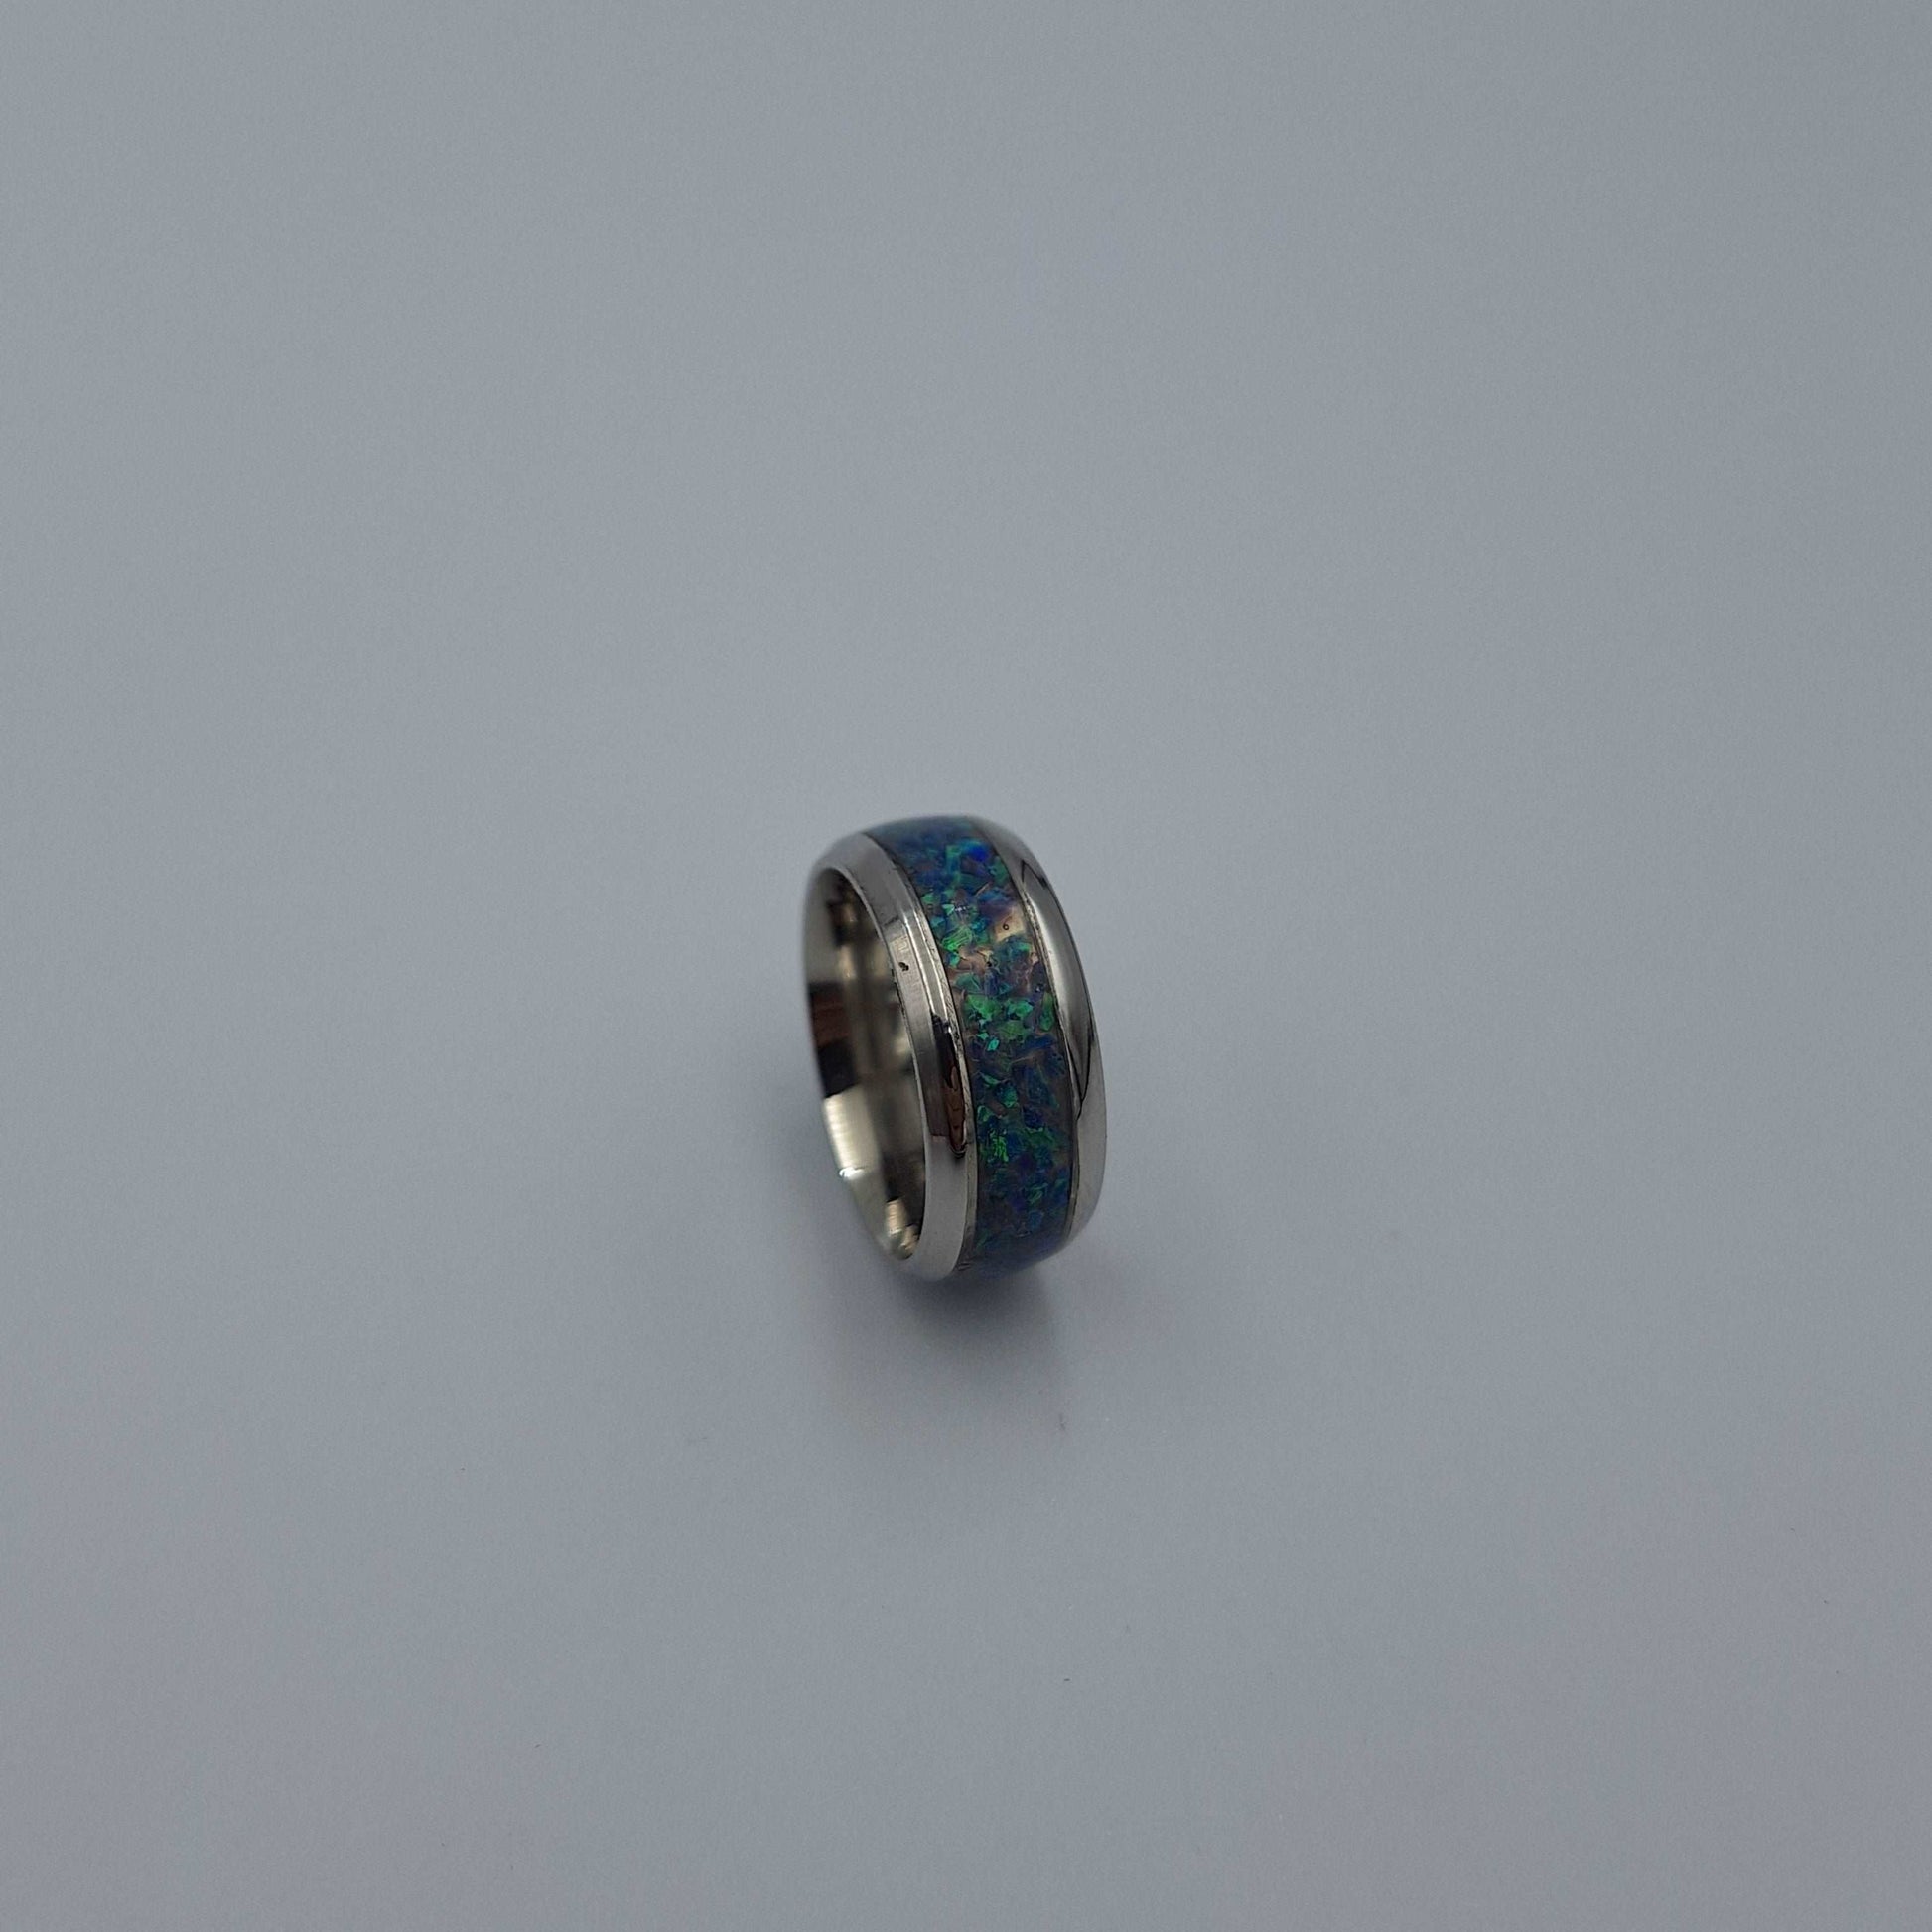 Stainless Steel 8mm Ring With Crushed Opals - Size 5